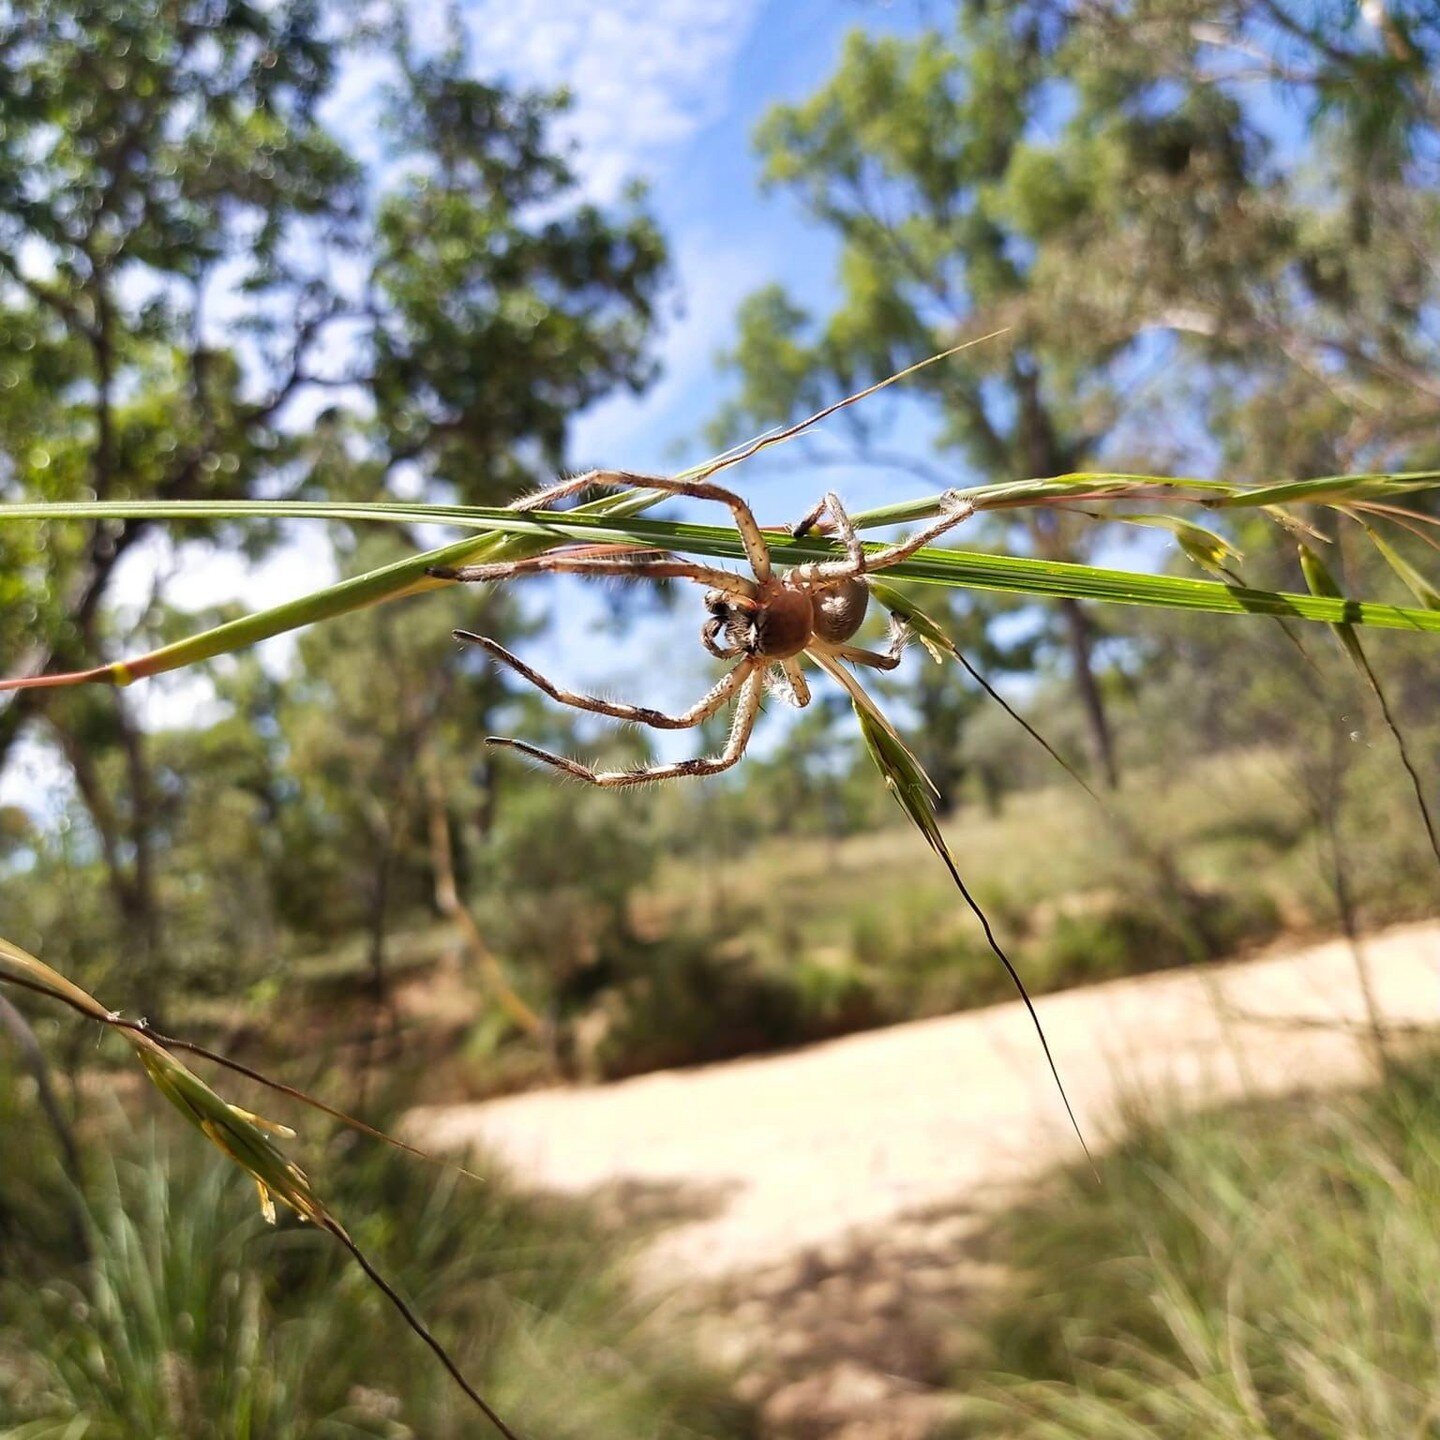 #WhereTheWildThingsAre

Our team was out near Charters Towers, North Queensland recently when this spider decided to hitch a ride one of our shoulders. 

Thankfully, it didn&rsquo;t mind being transferred to this leaf stem where it relaxed in the sun